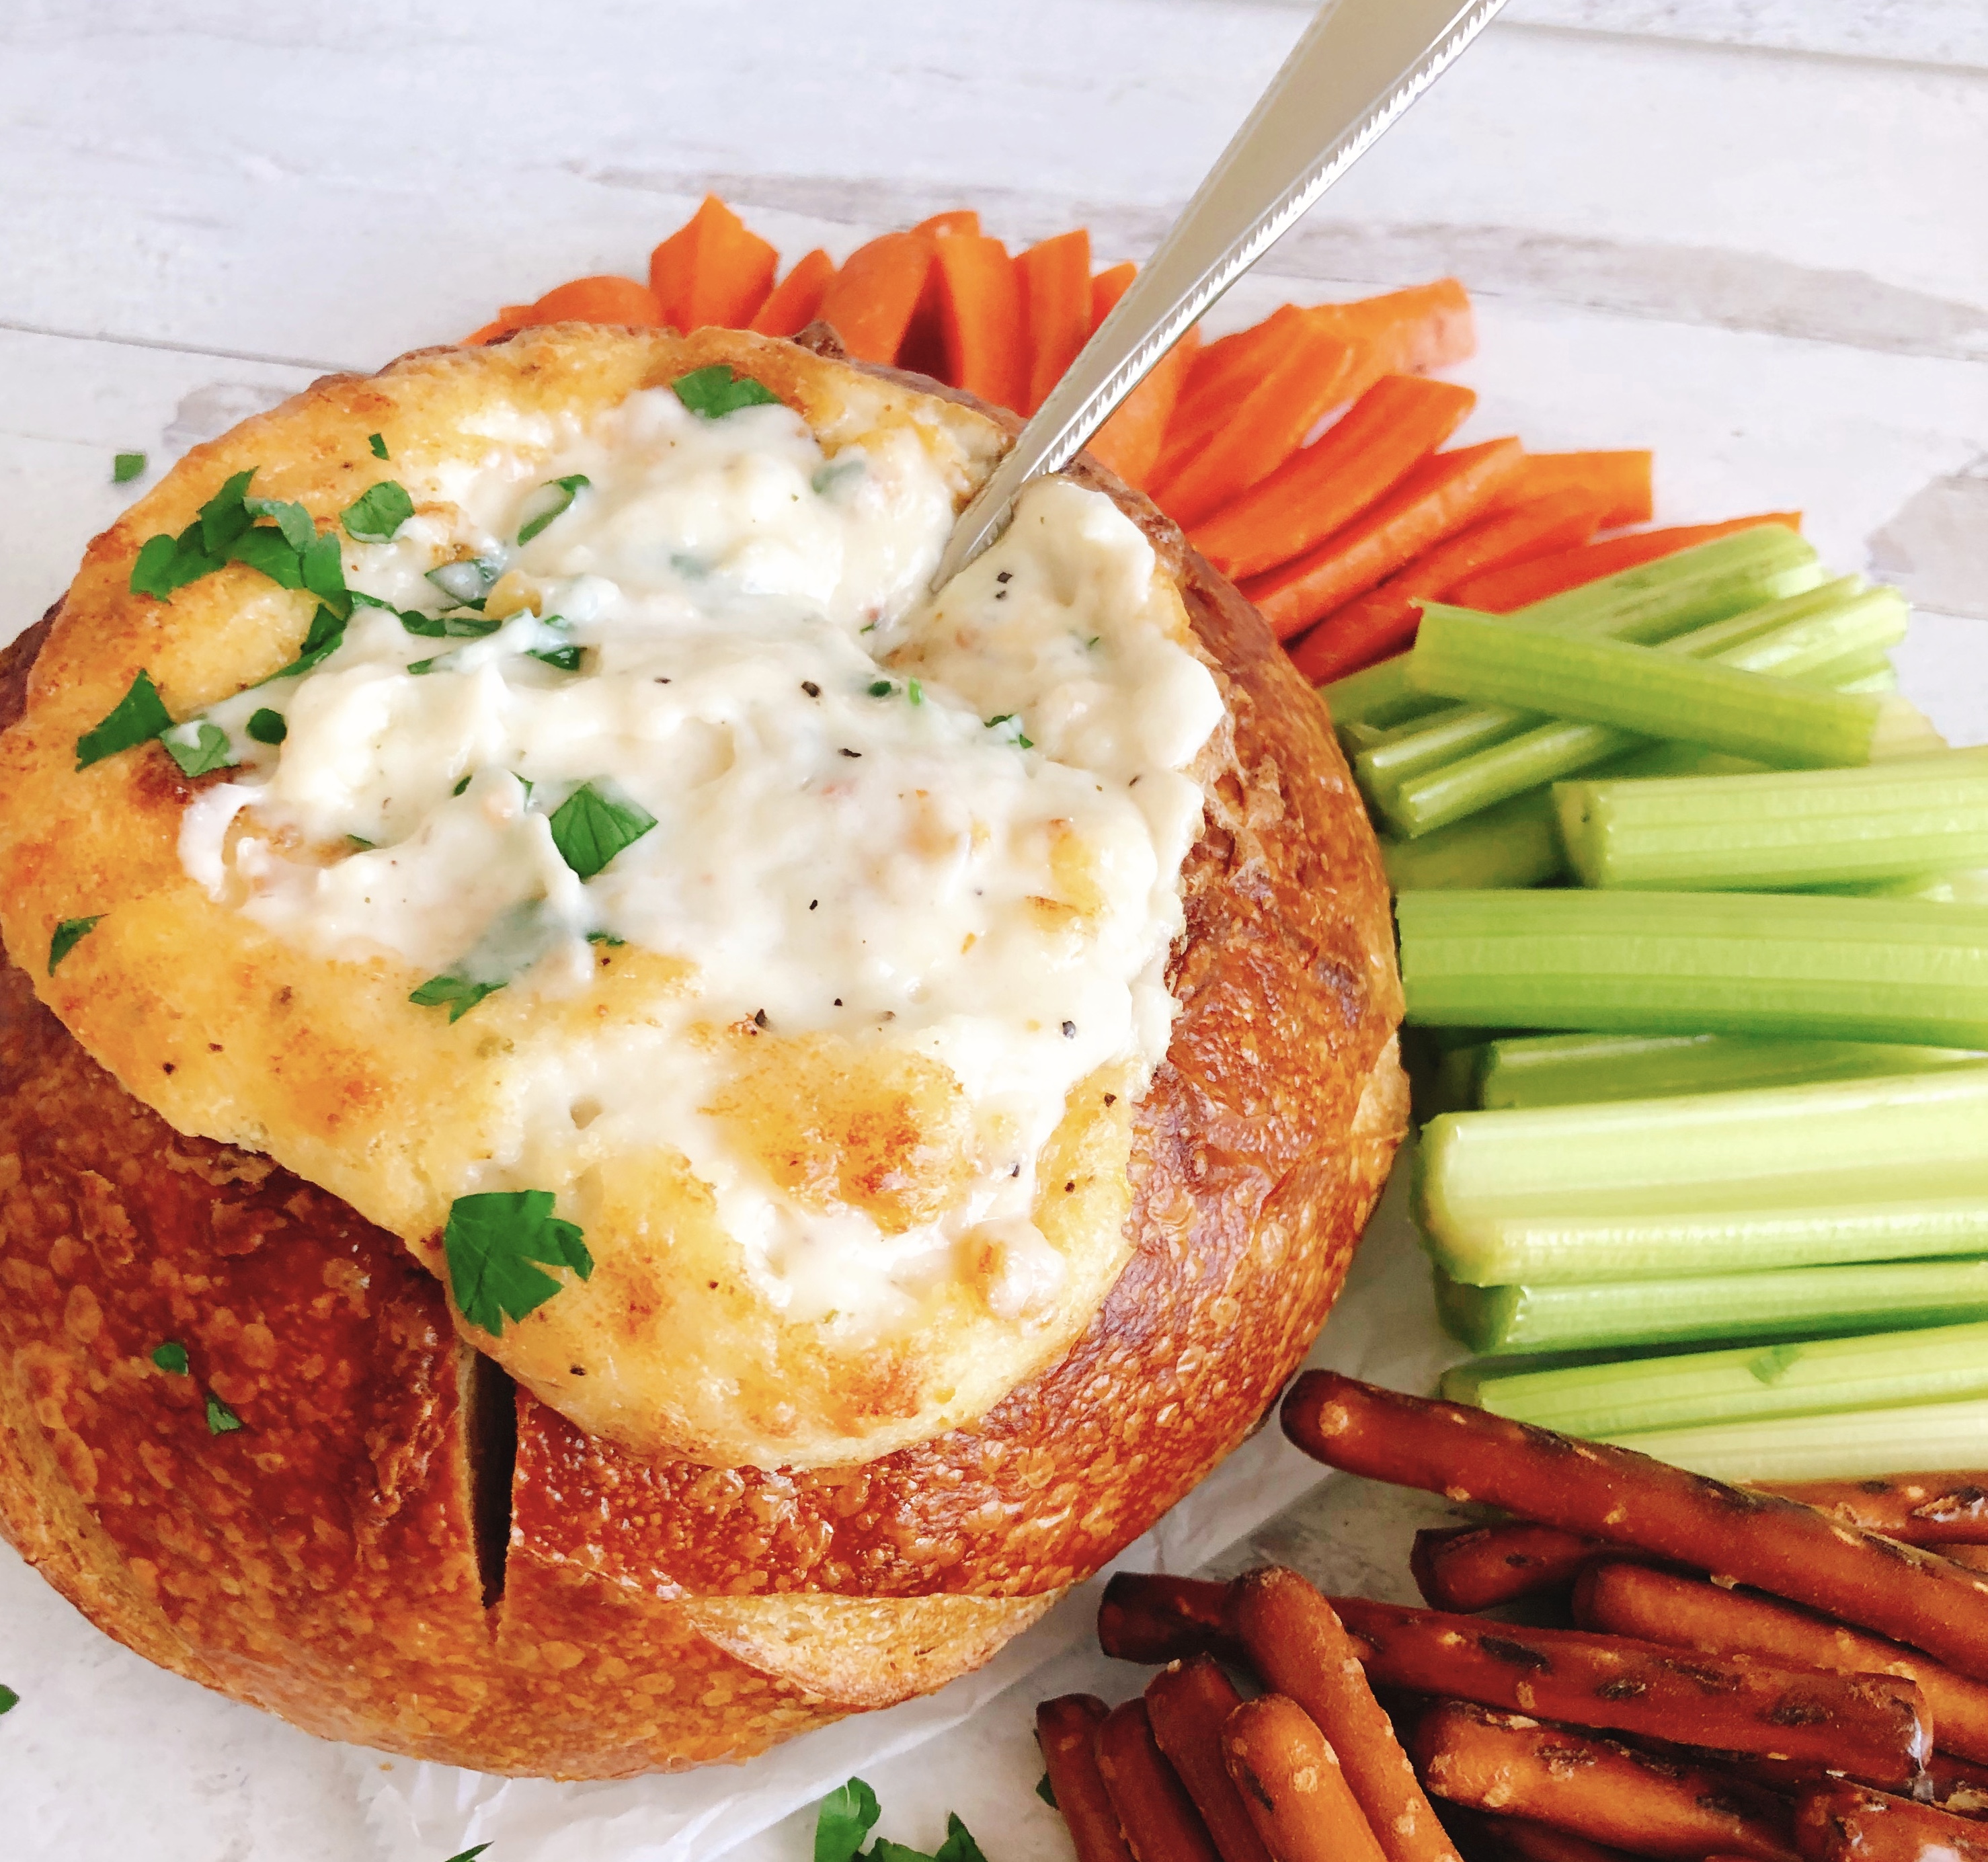 Parmesan Bread Bowl Dip with a spoon surrounded by carrots, celery and pretzels.